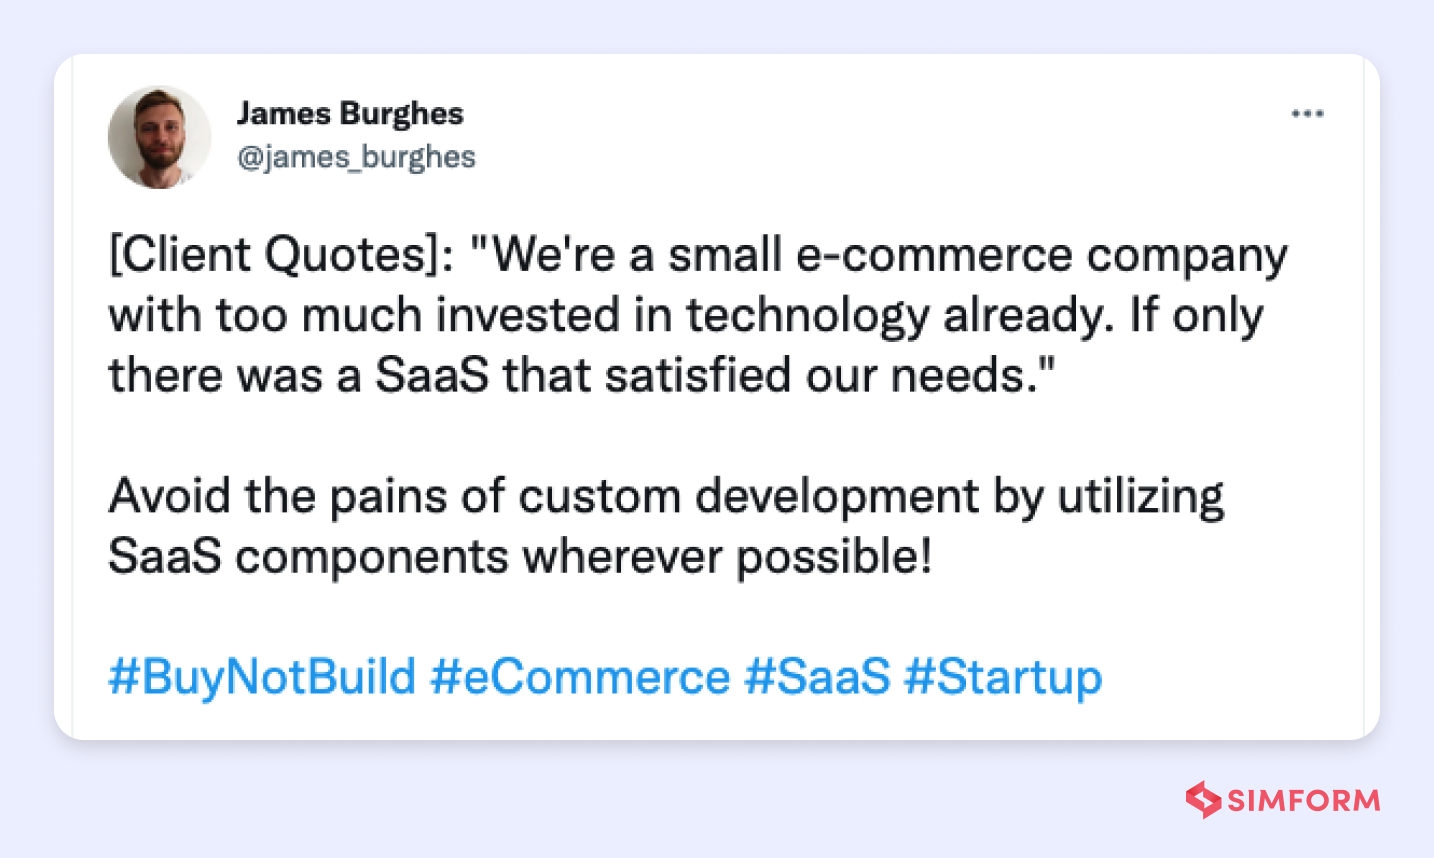 SaaS components